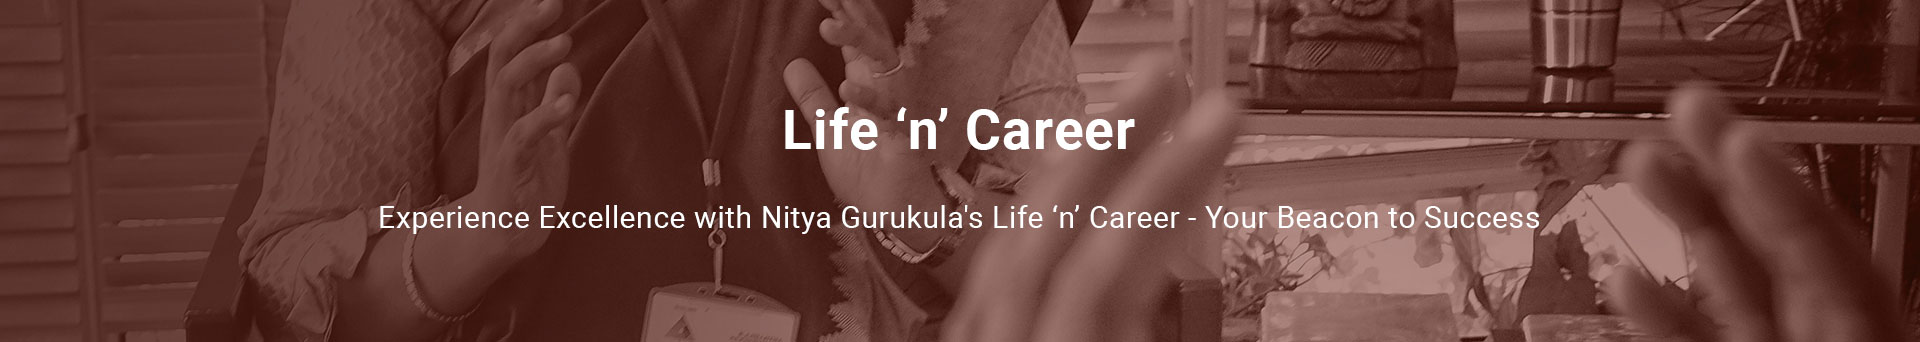  Career Counselling Services